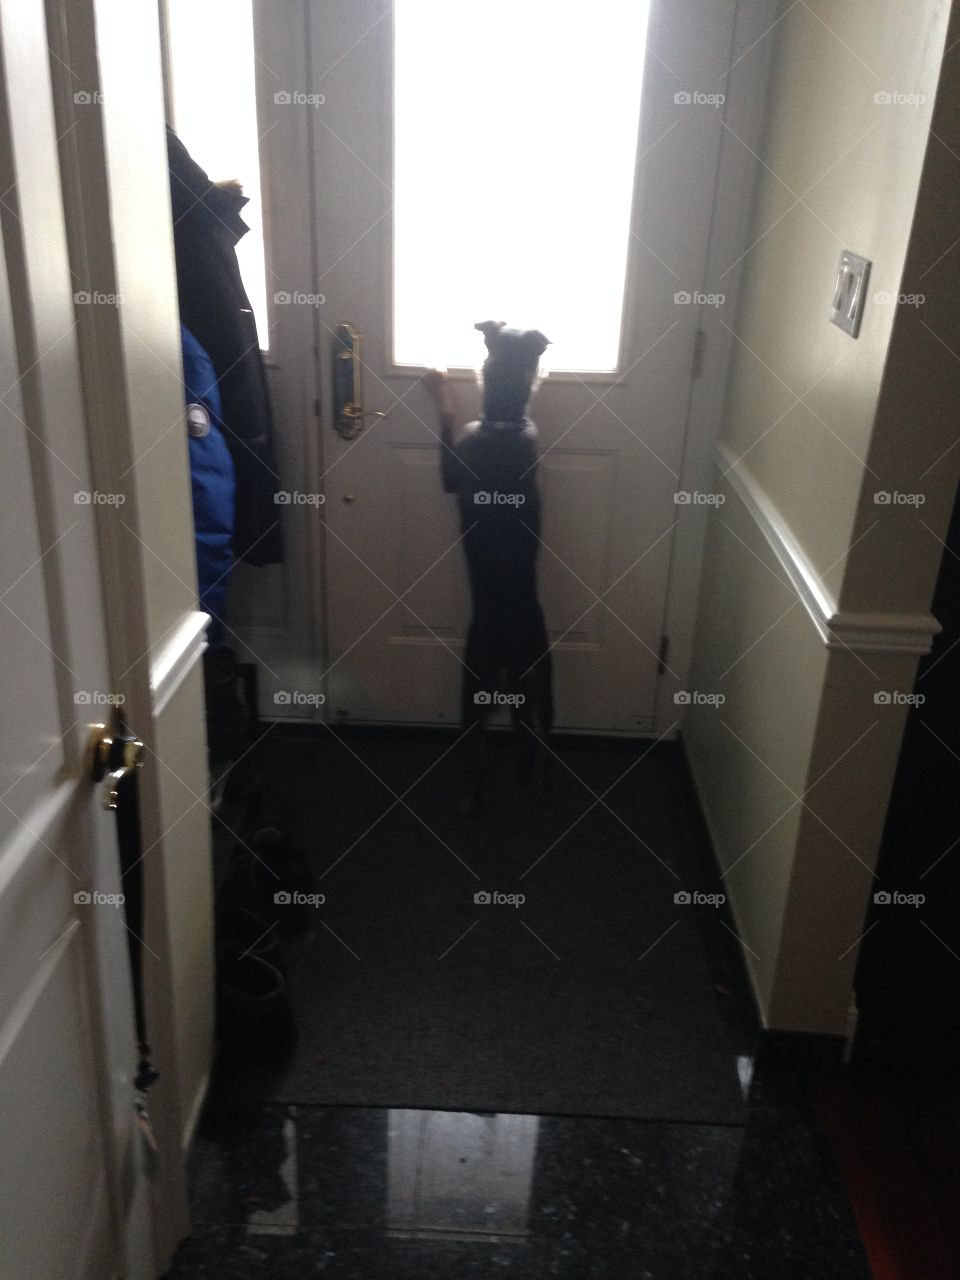 Dog waiting at the front door for the owners return.